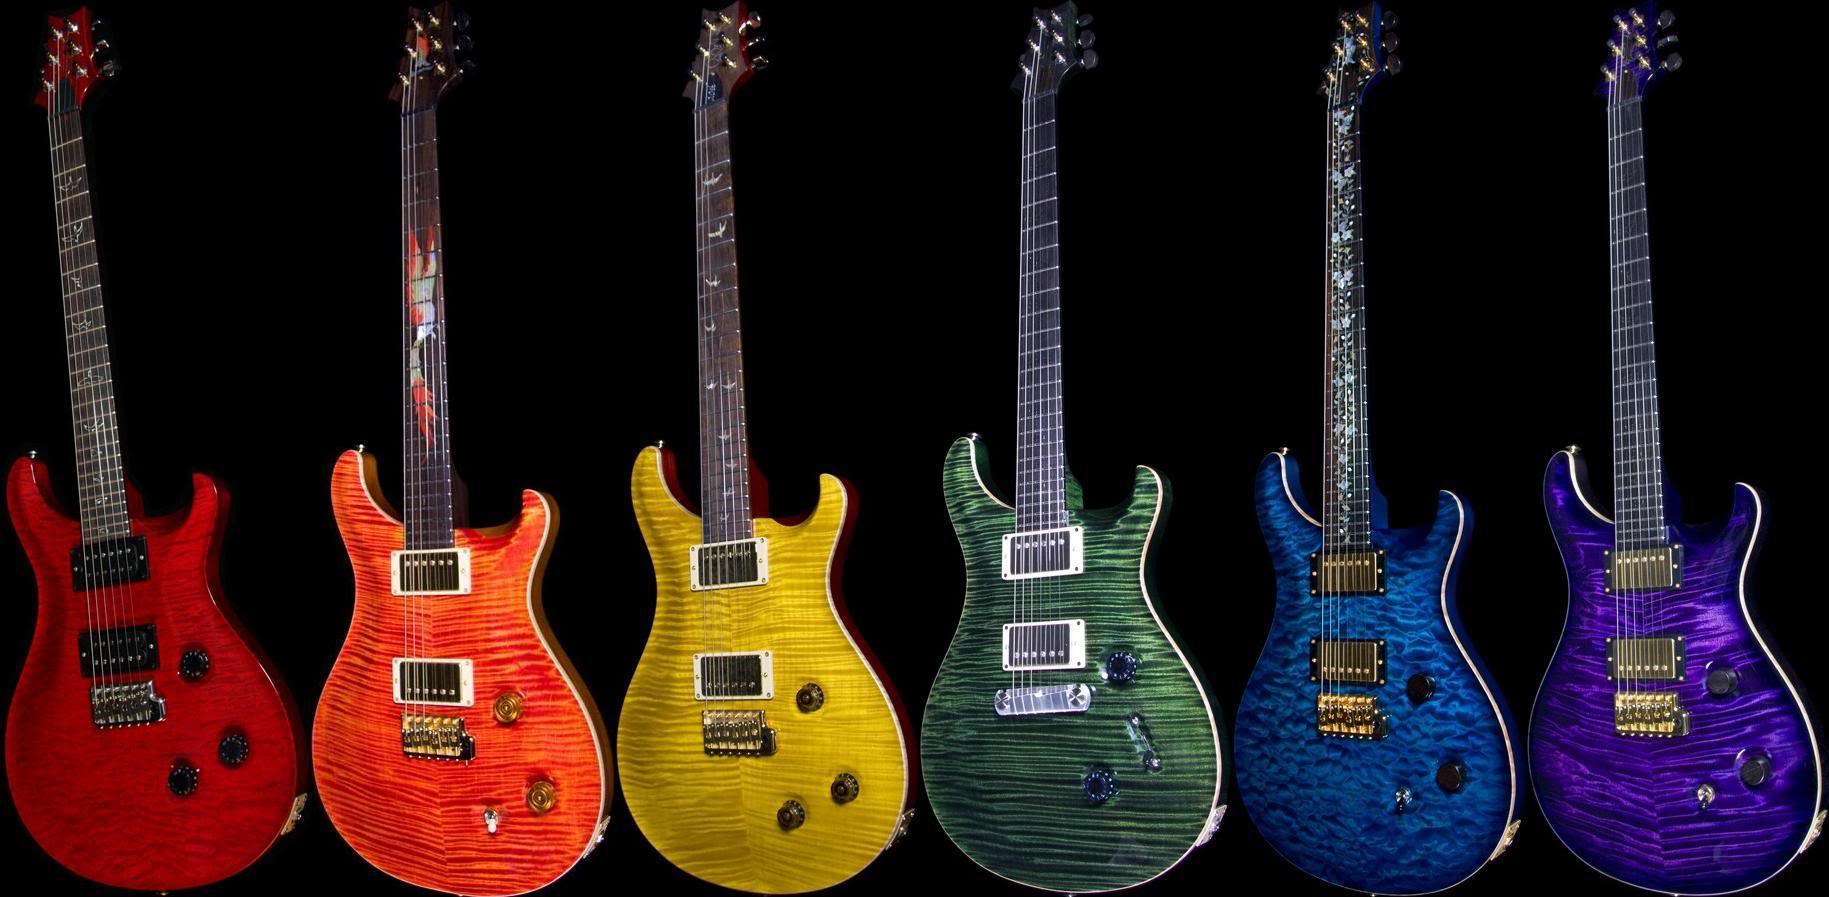 Free download paul reed smith wallpaper [1829x897] for your Desktop, Mobile & Tablet. Explore Paul Reed Smith Wallpaper. Esp Guitars Wallpaper, Guitars Wallpaper for Desktop, PRS Guitar Wallpaper HD 1080p